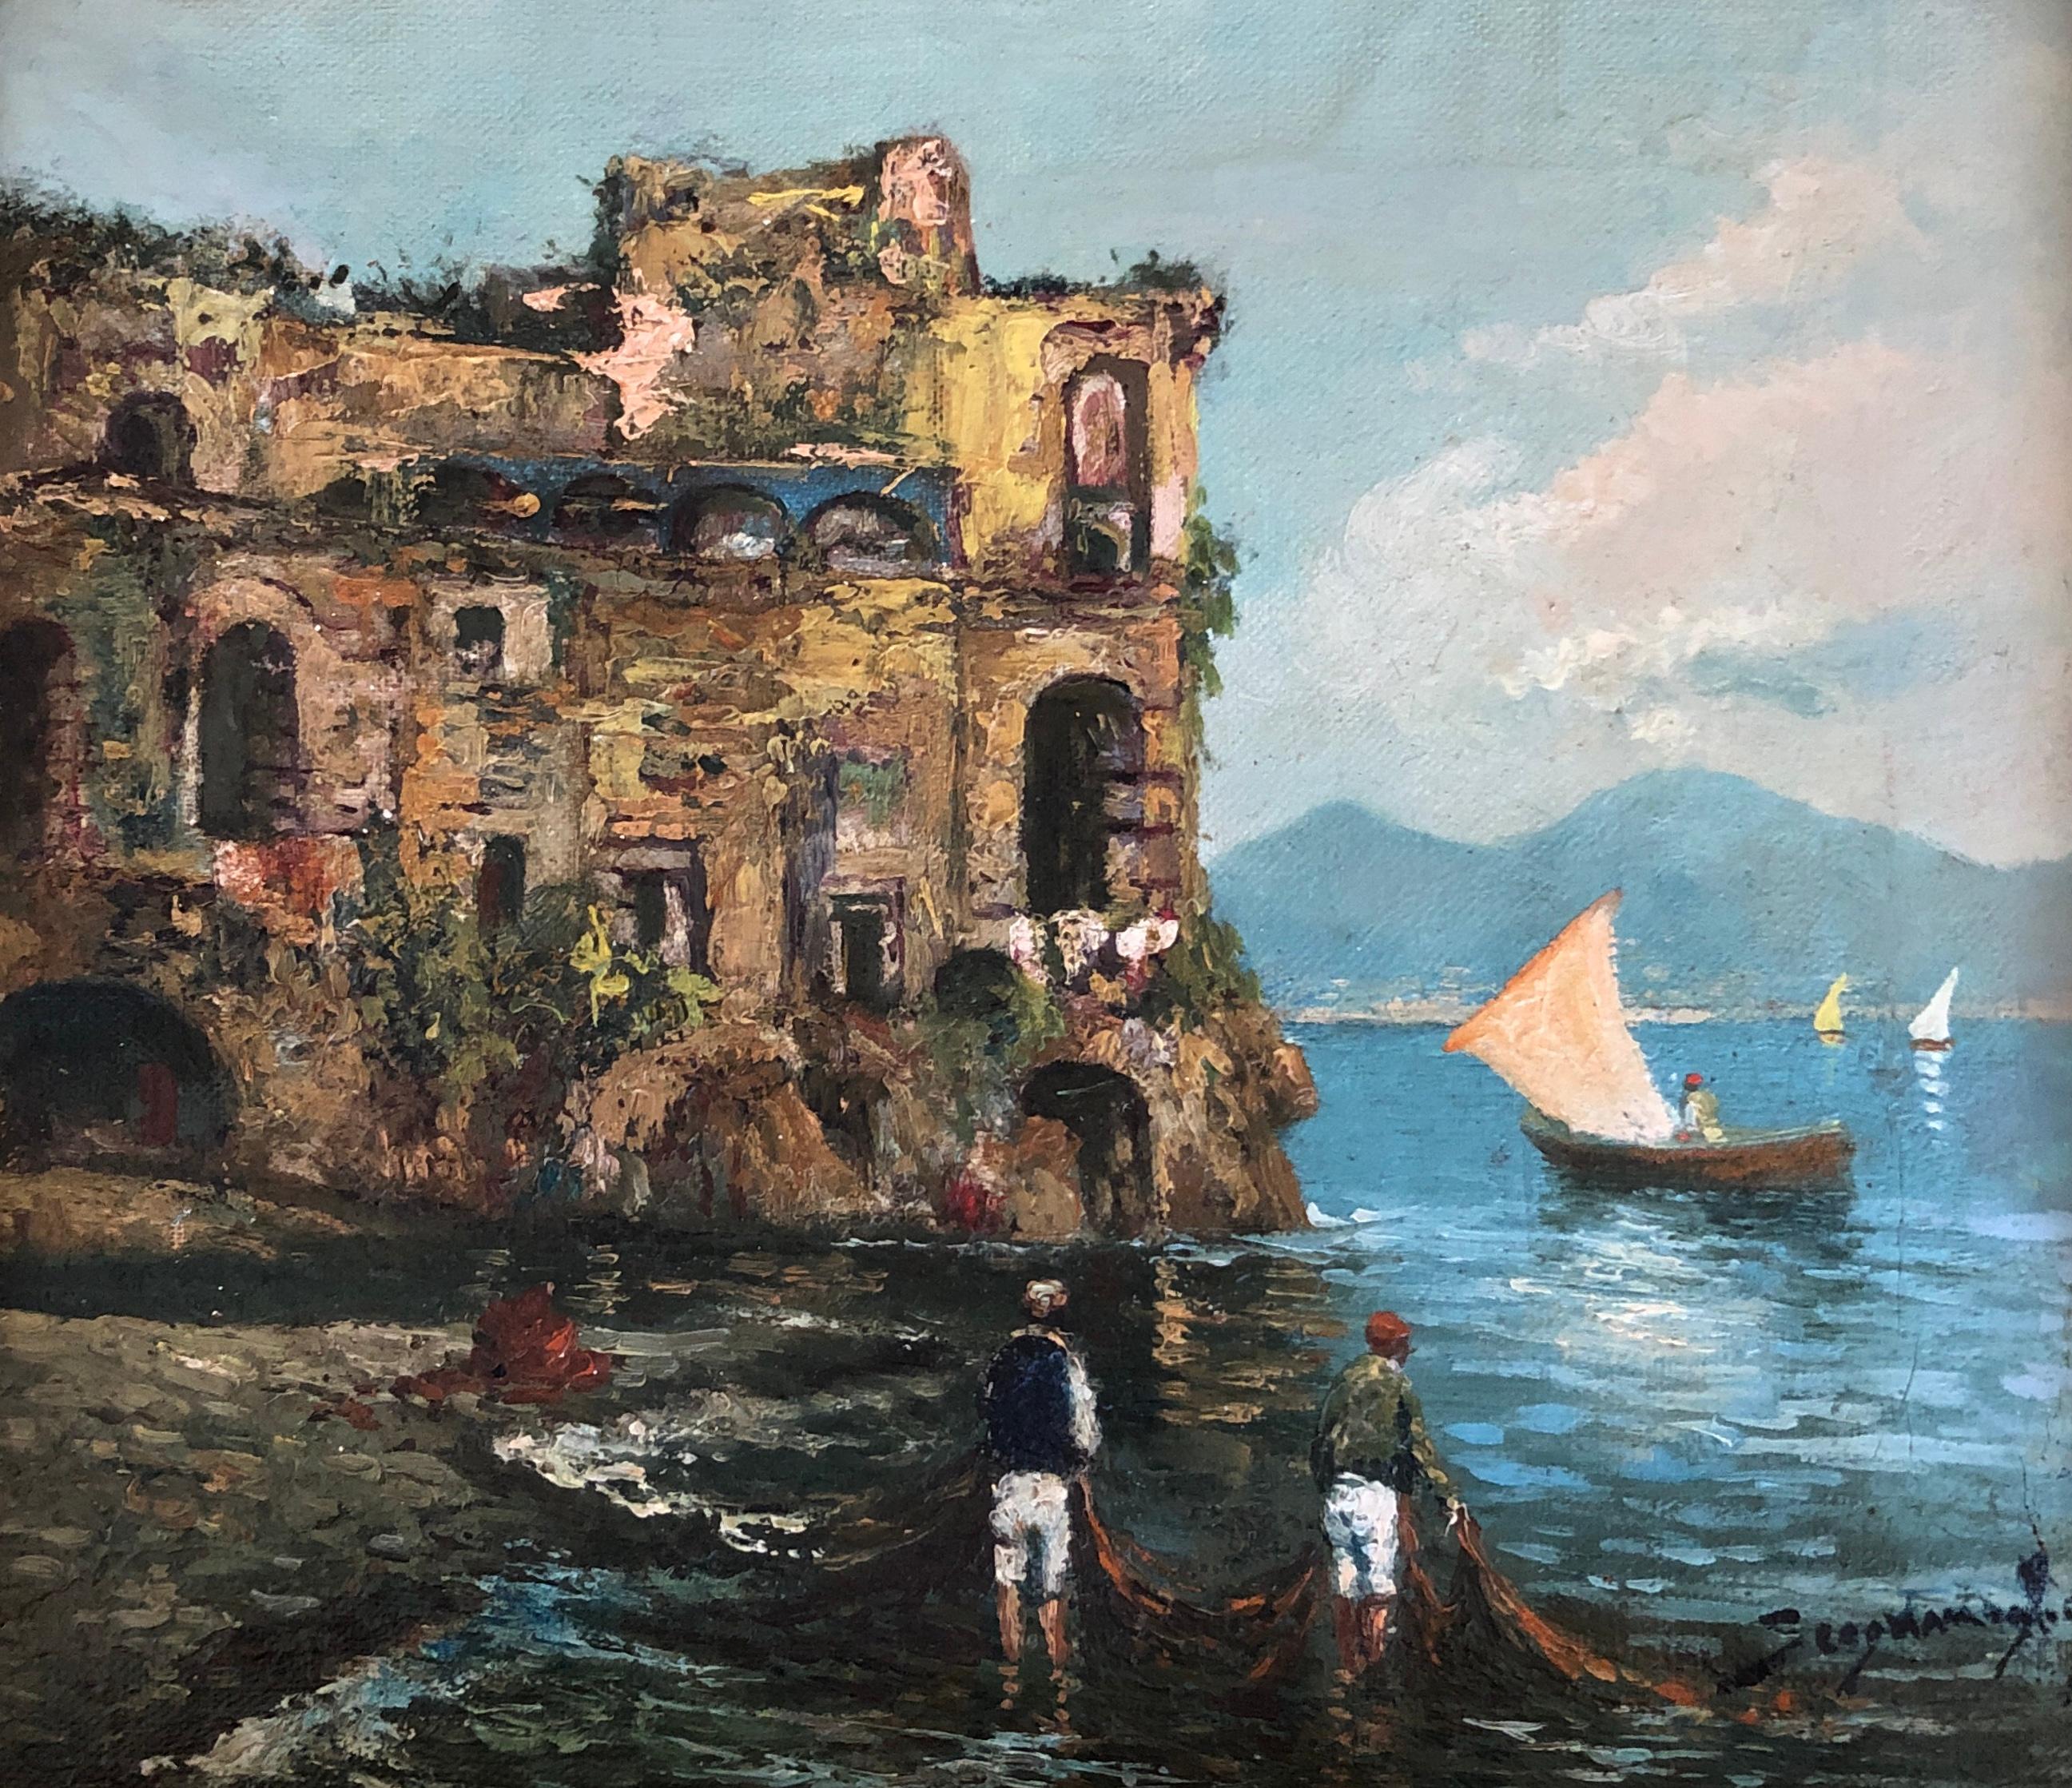 Bay of Naples and fishermen